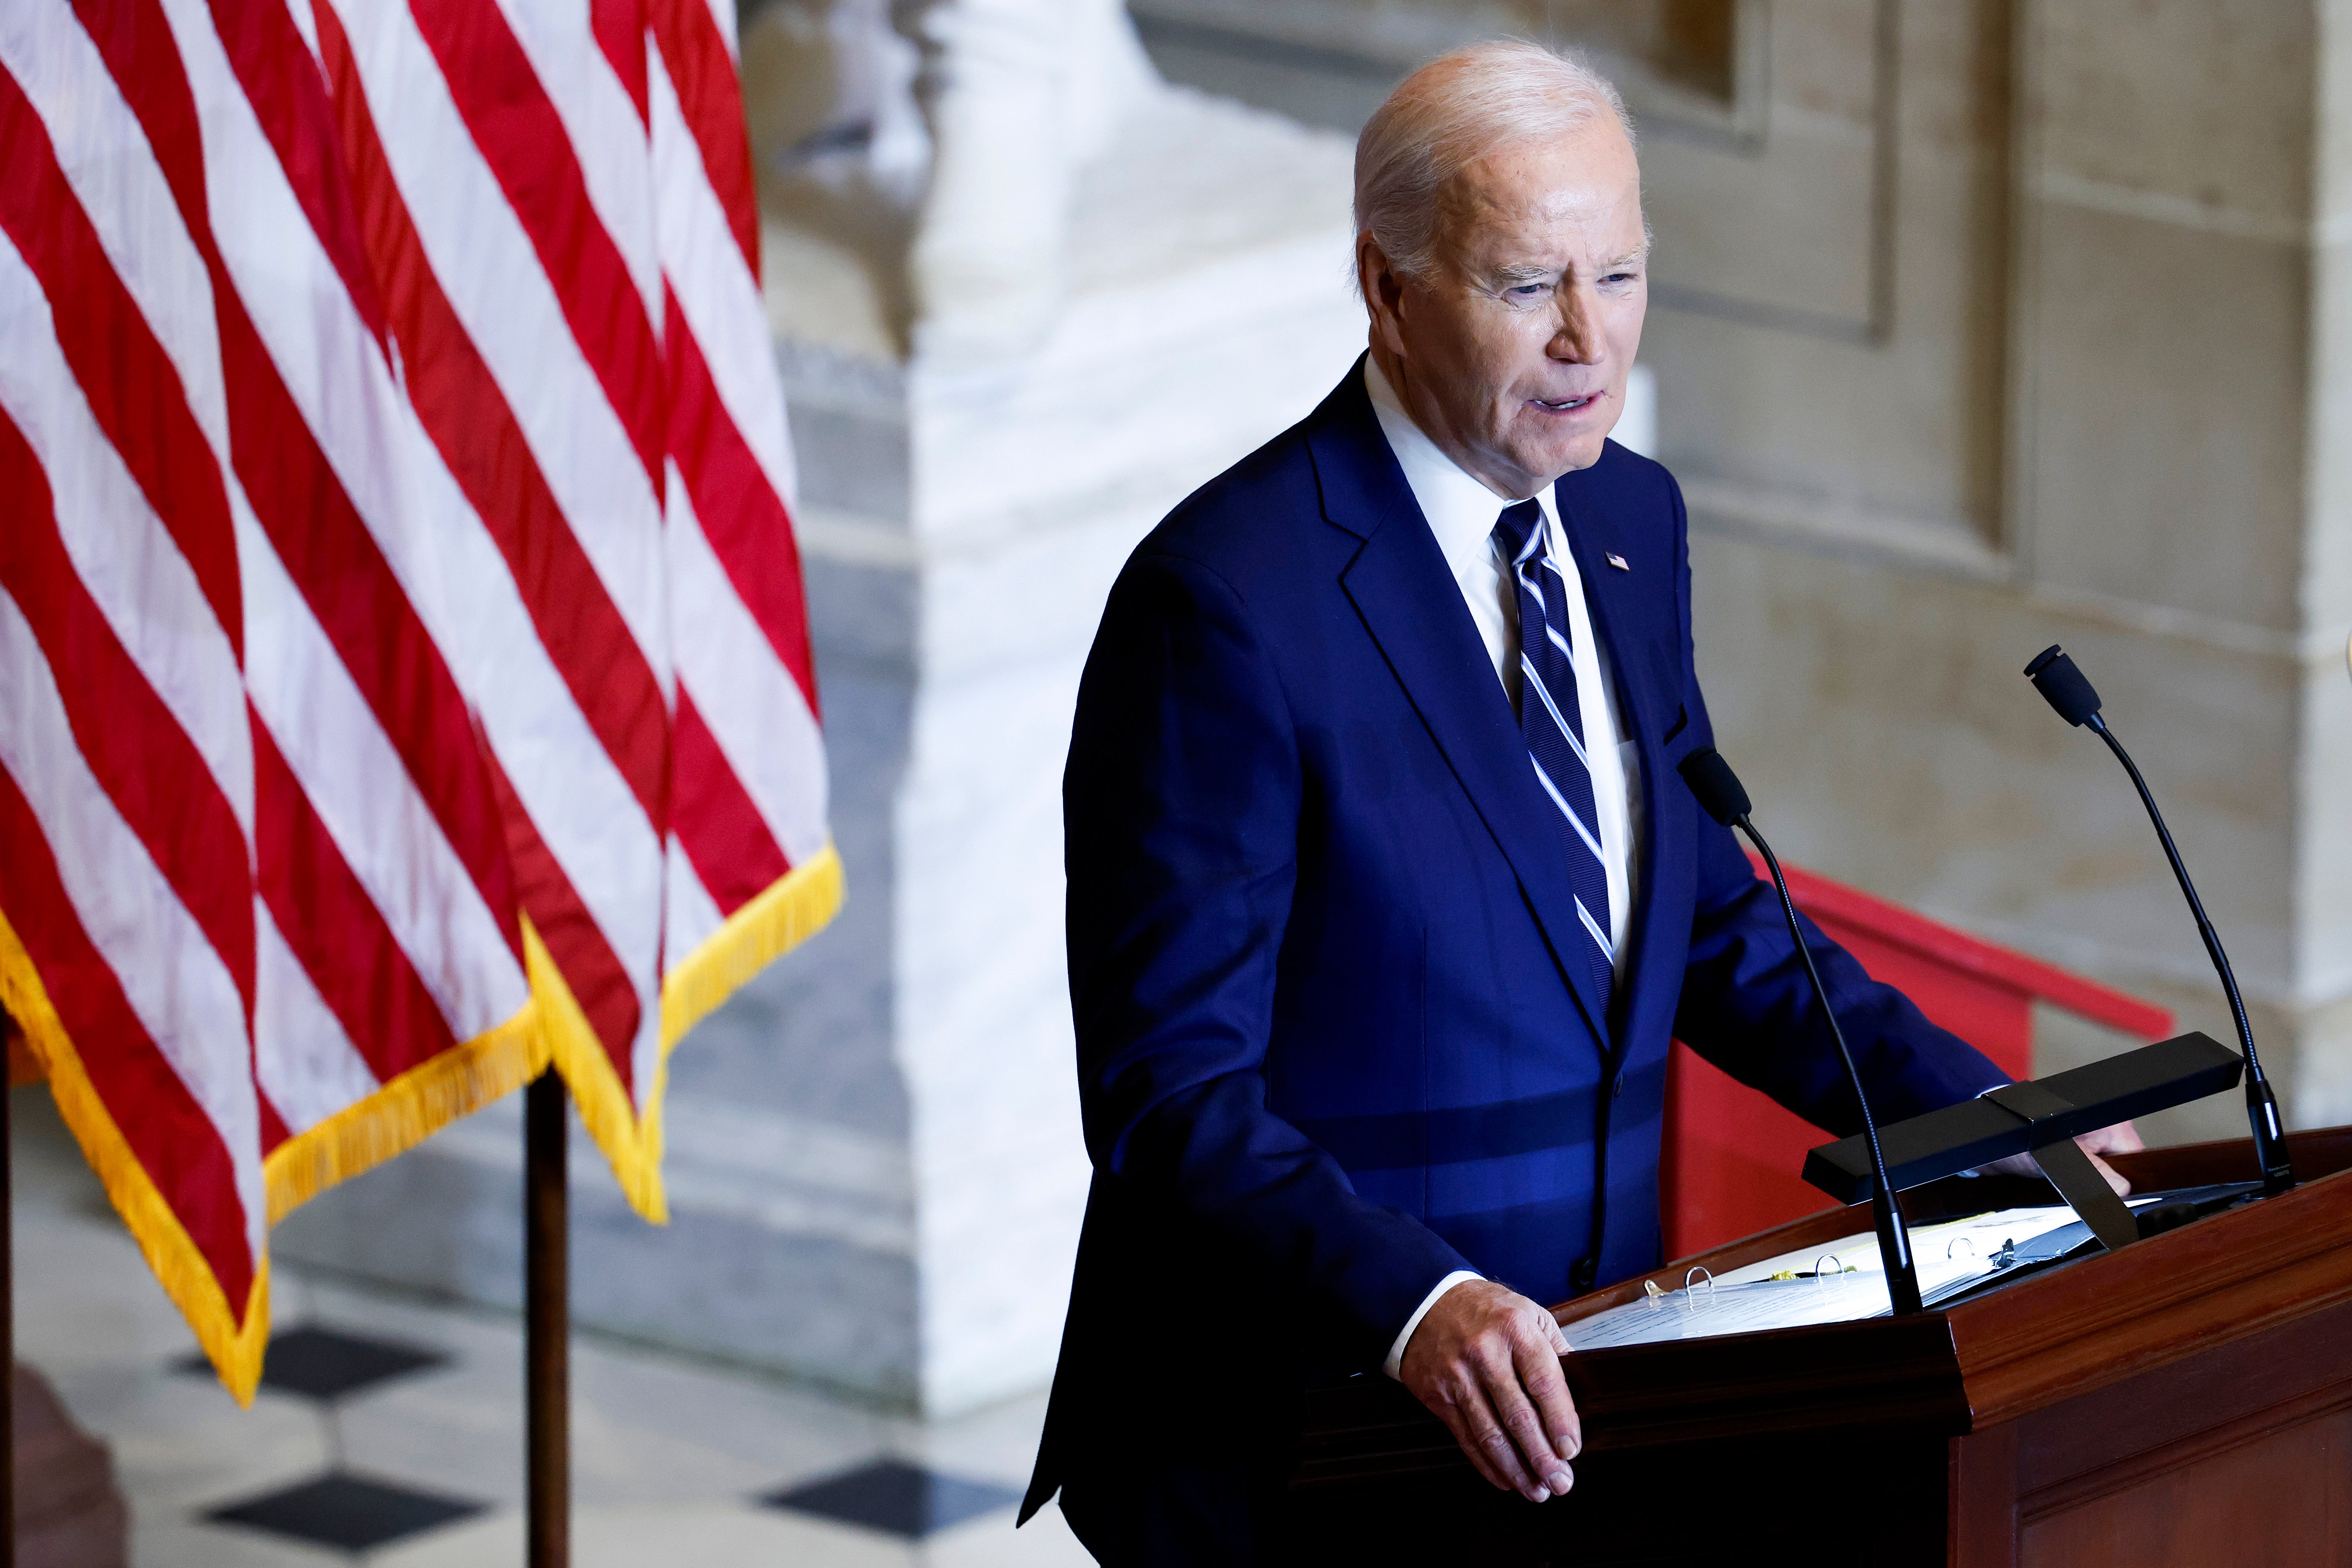 President Joe Biden is trying to win over voters with his economic record